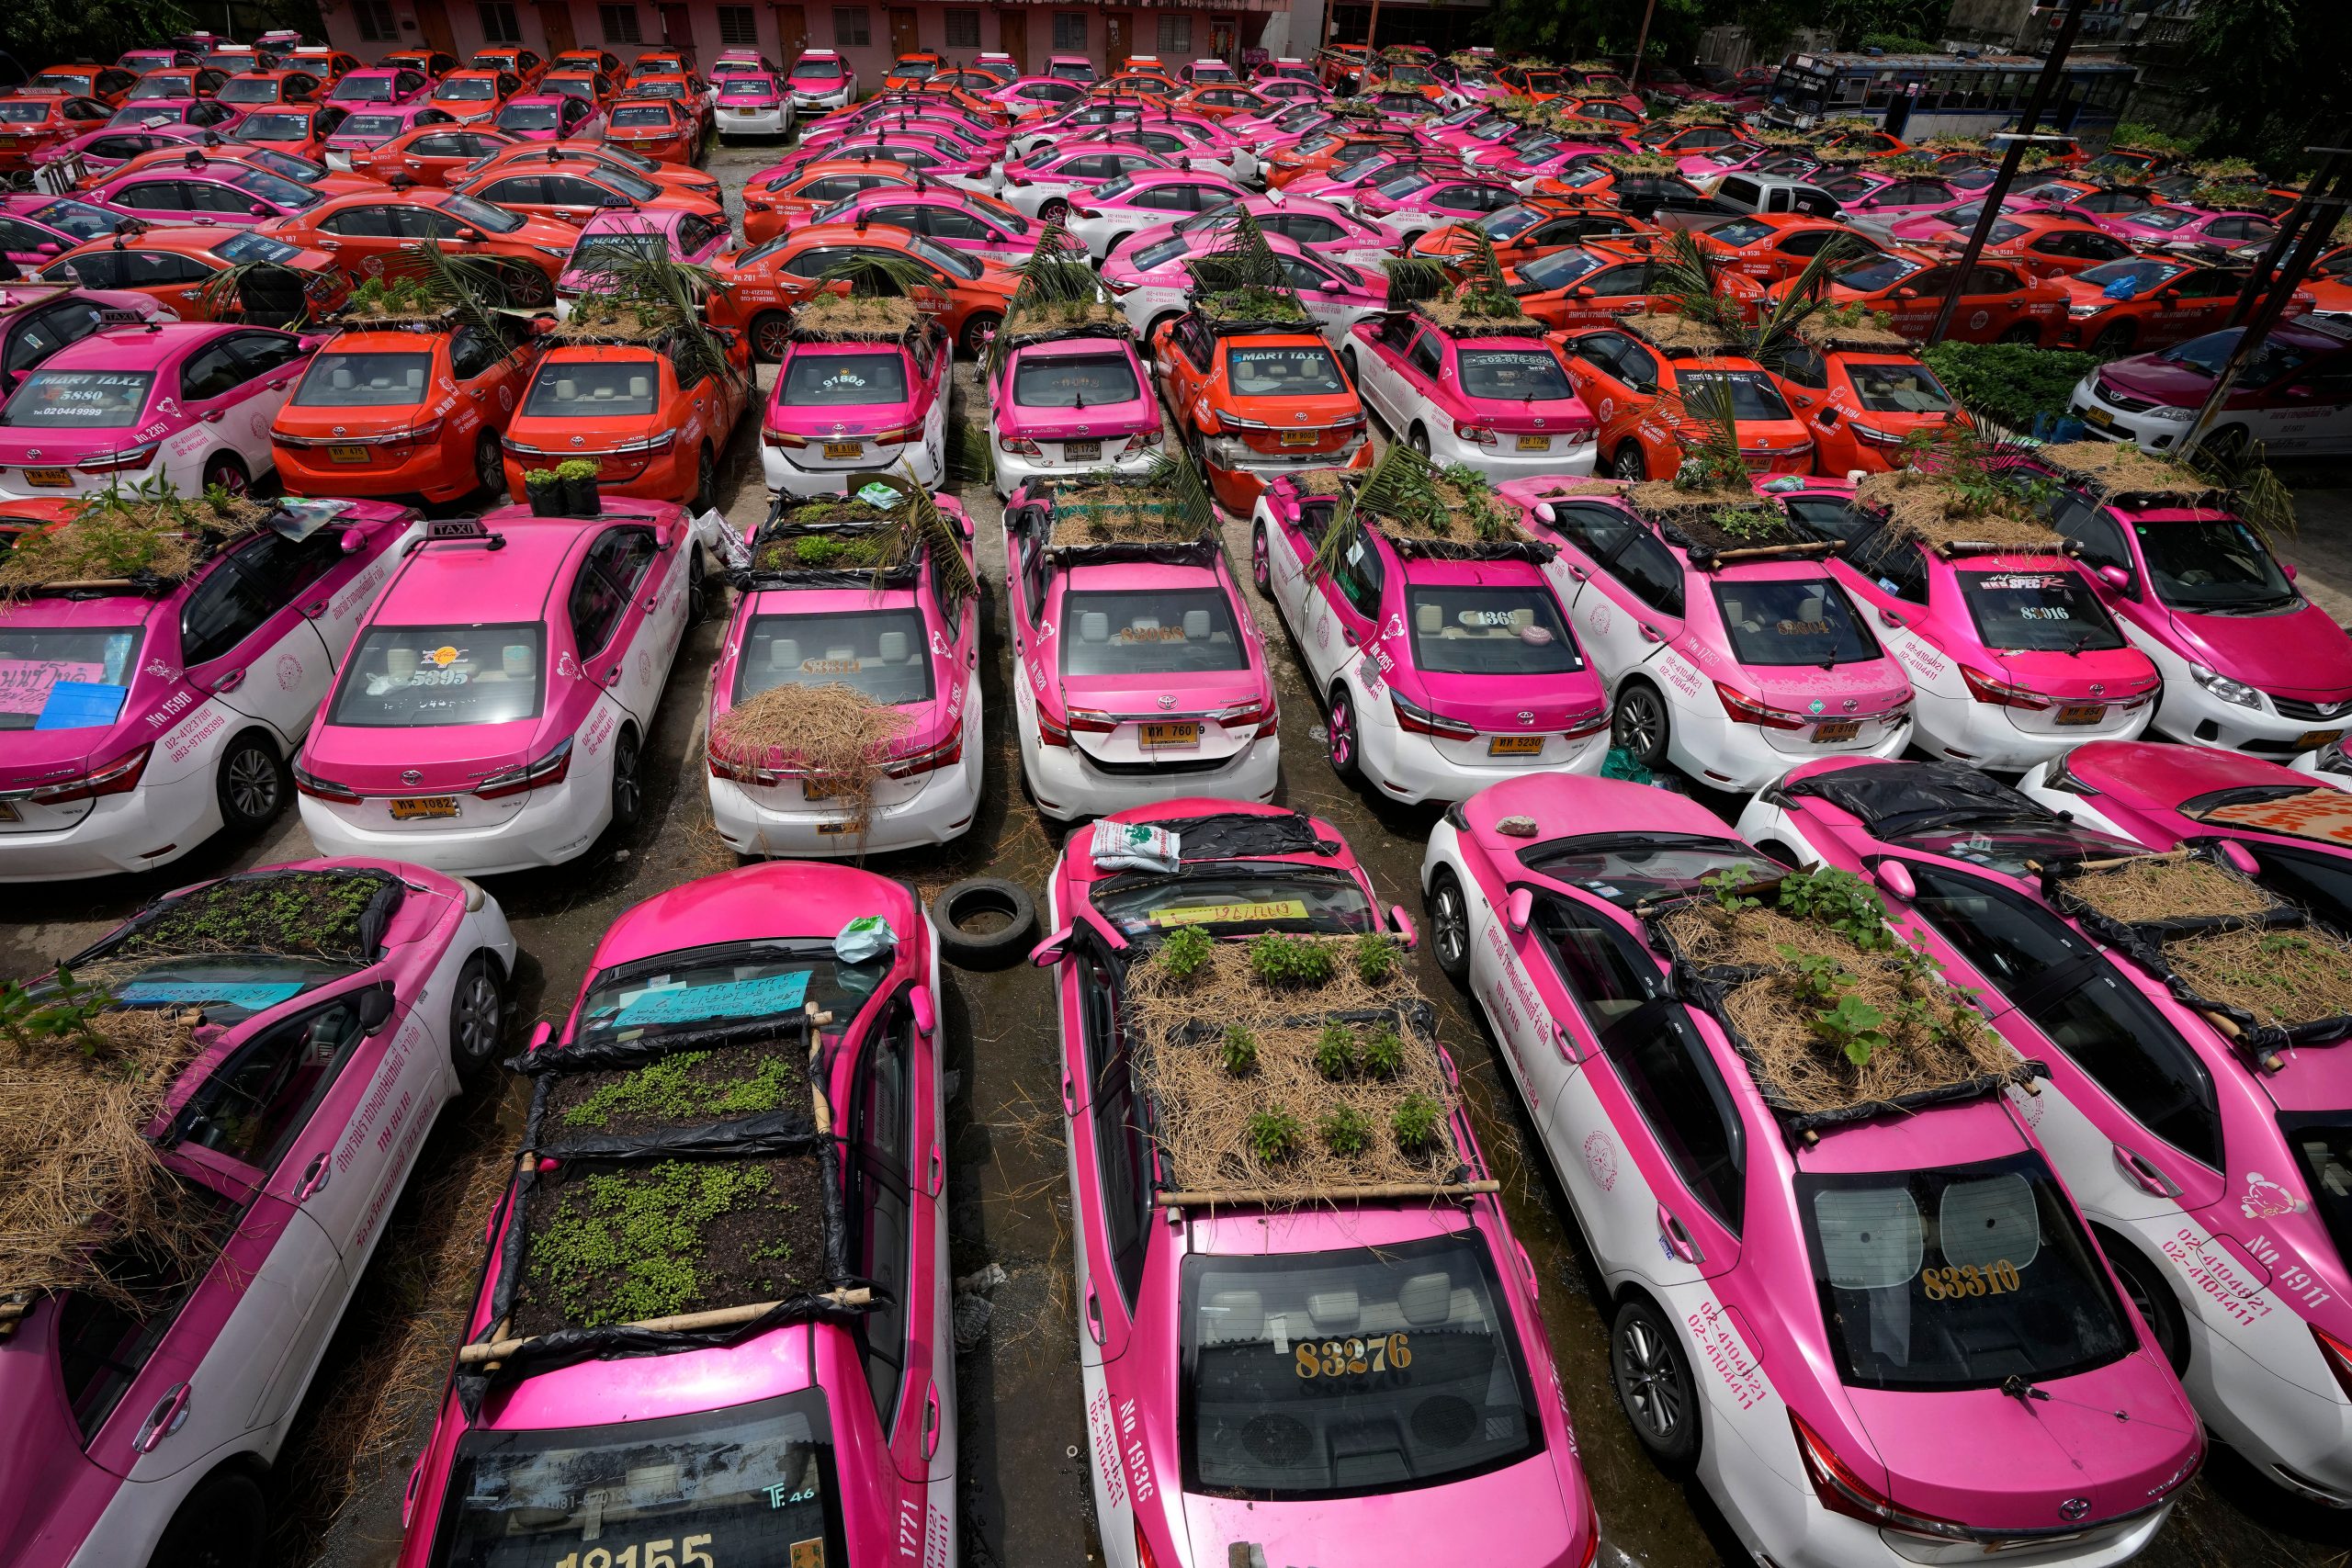 In pics: Thailand taxi workers turn idled cabs into roof-top gardens